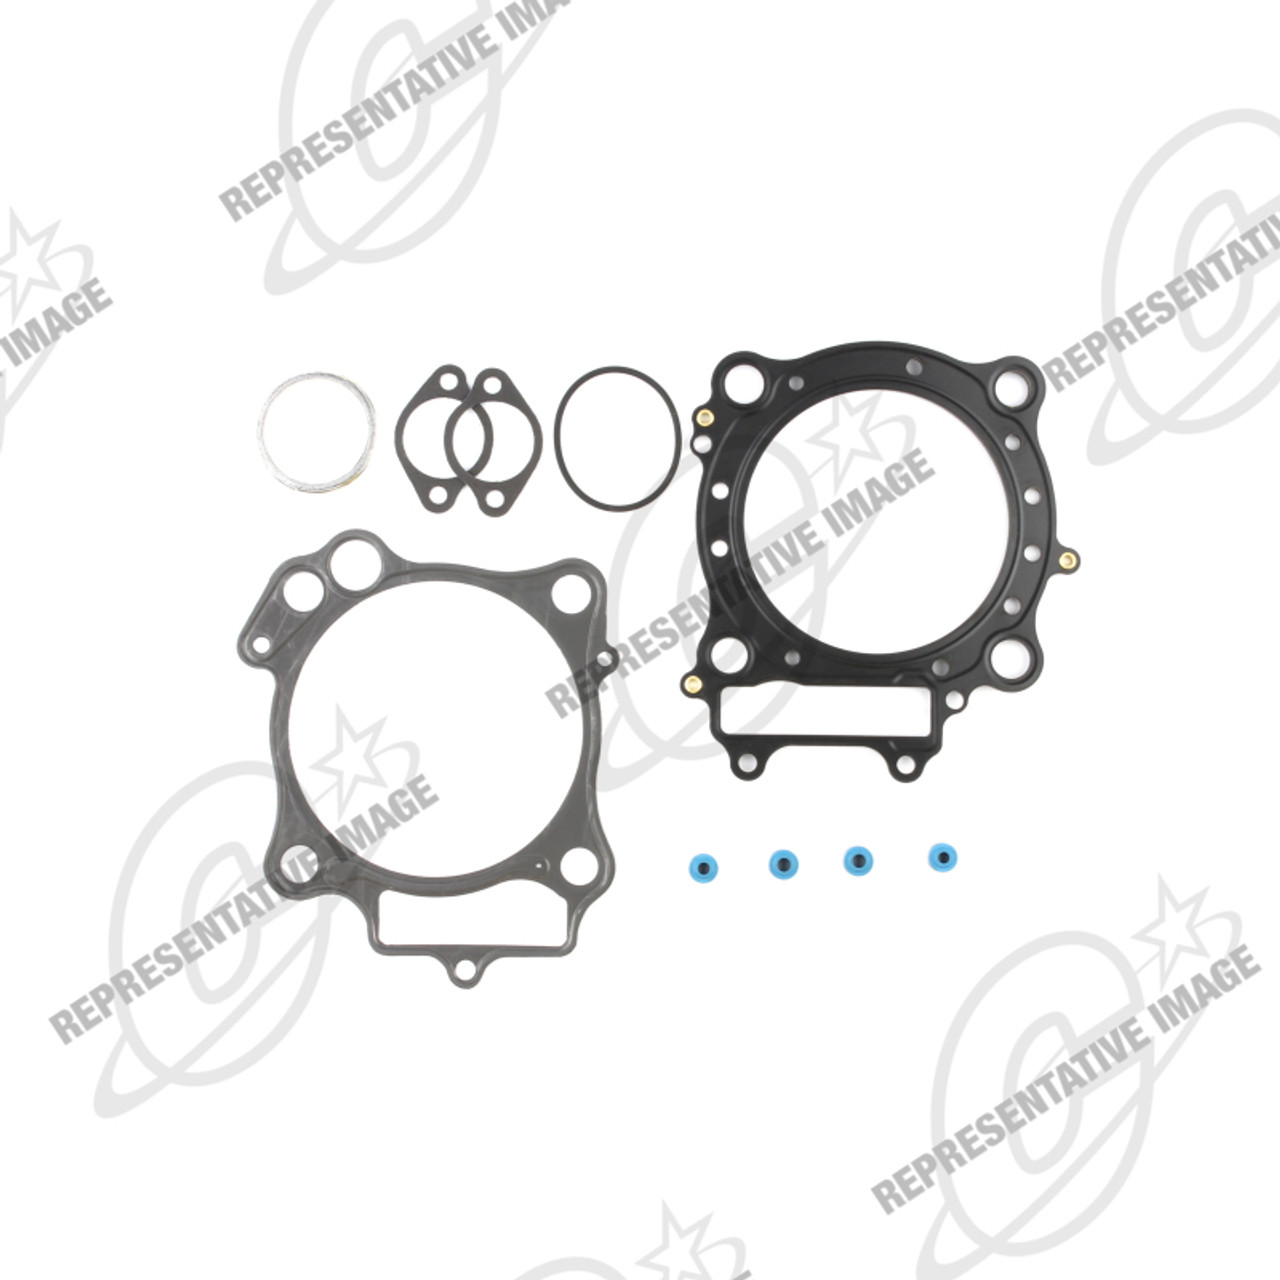 Cometic 98-03 Yamaha YZF1000R1 .032 Clutch Cover Gasket - EC383032AFM Photo - Primary